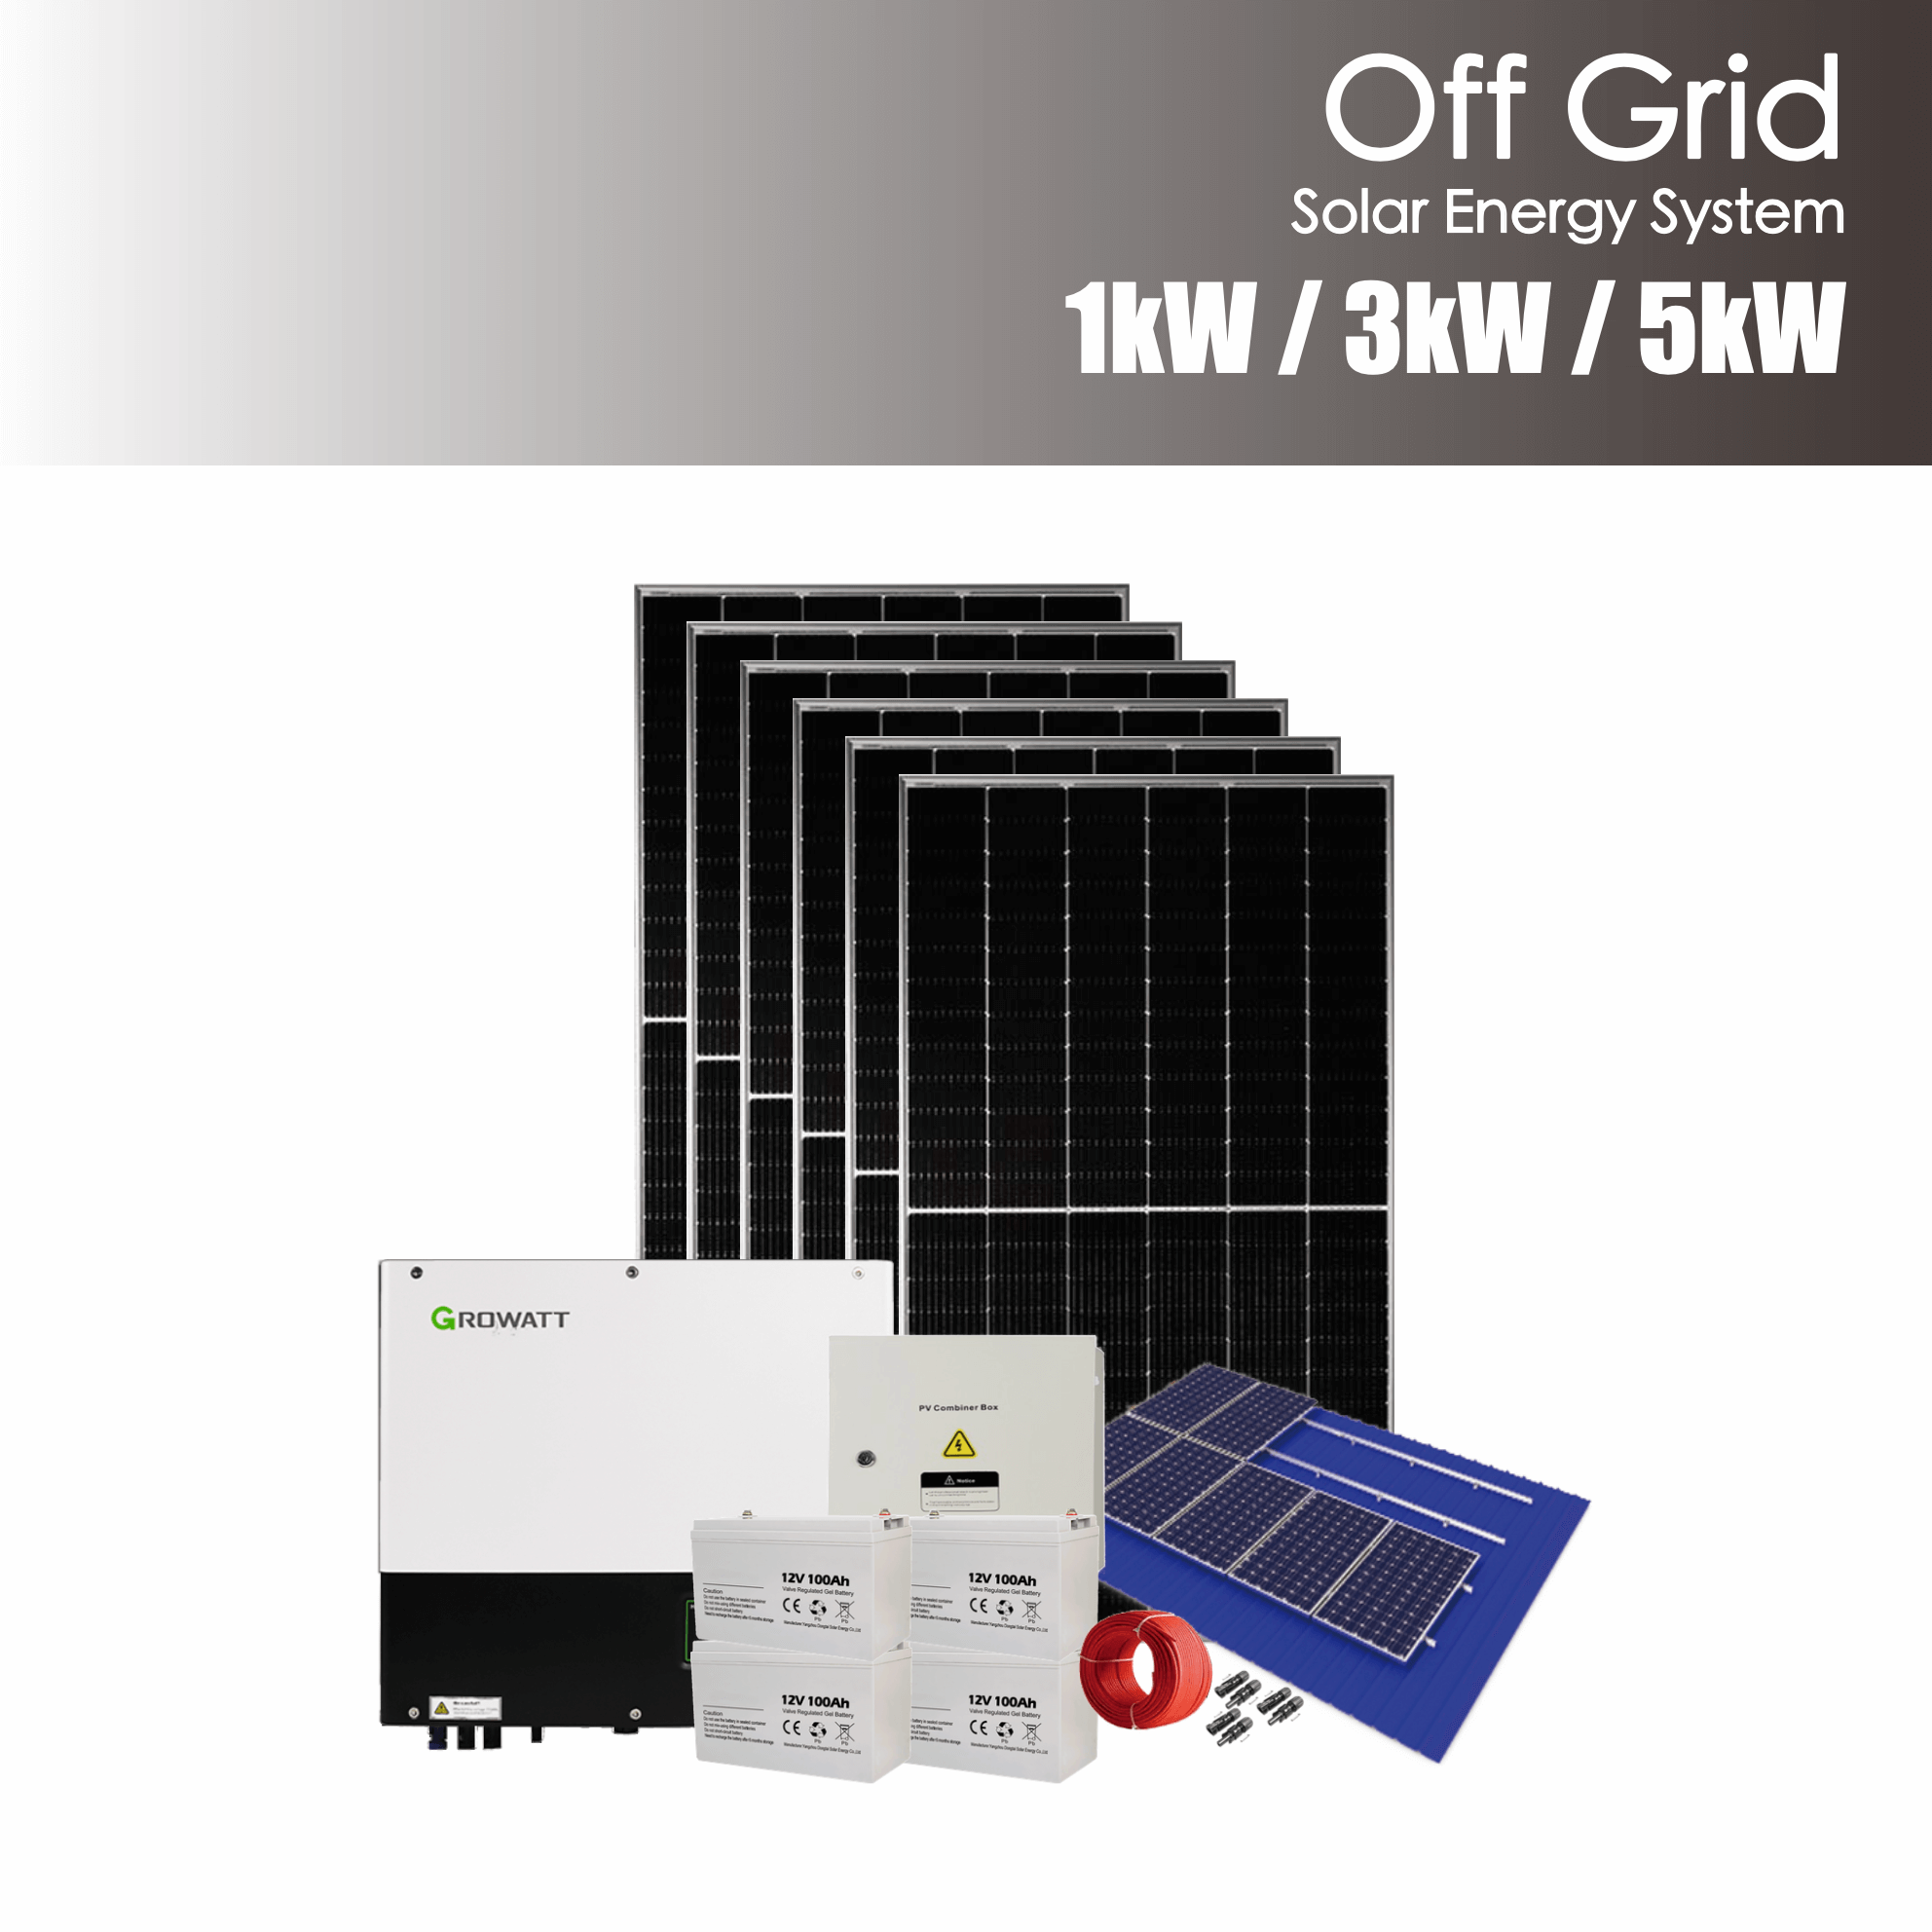 Off-Grid solar energy system – Lower power (up to 5kW) Featured Image